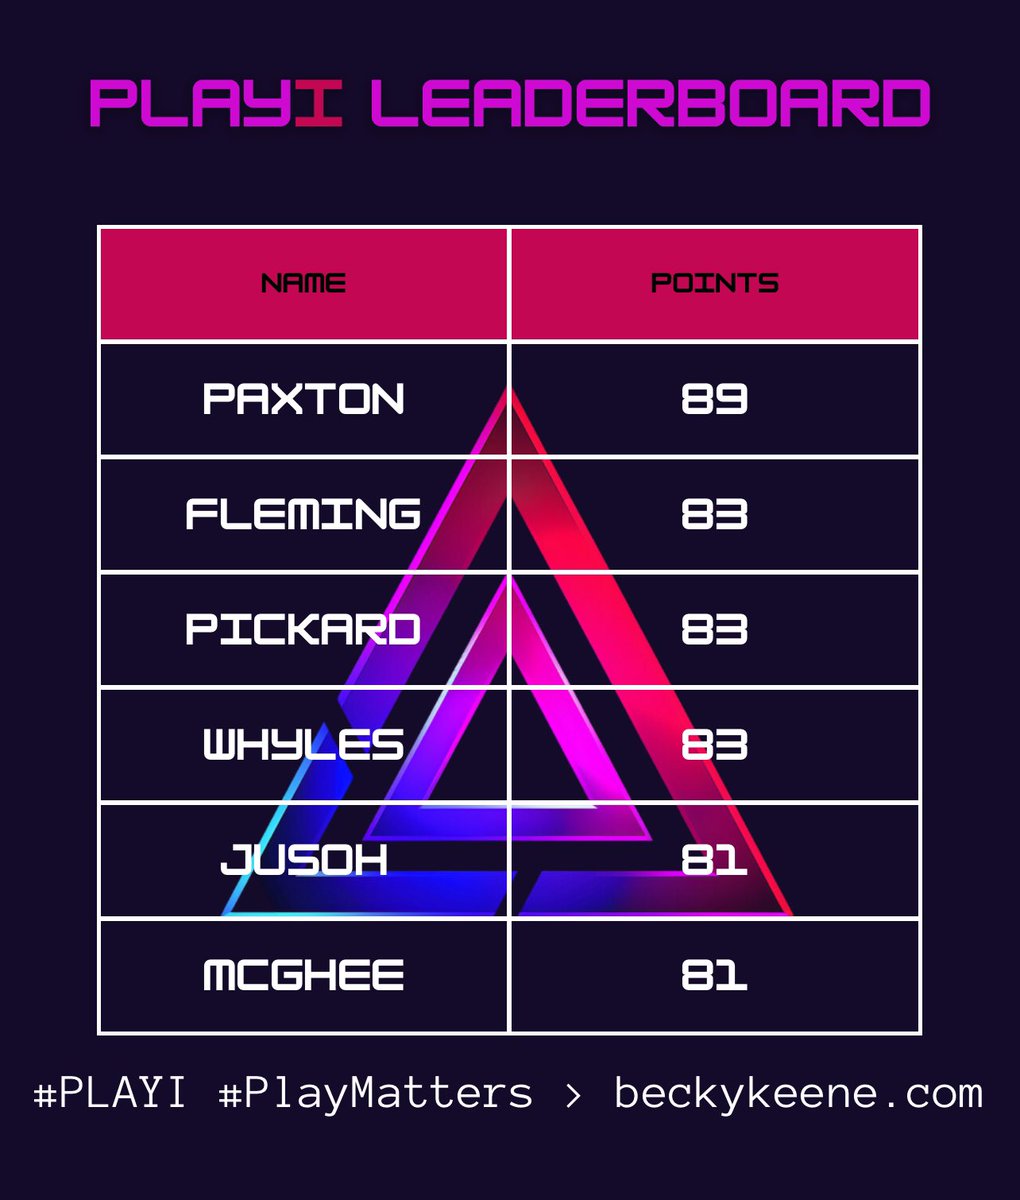 The leader board is close!!!! Joint 2nd 🙌 @BeckyKeene #PLAYI #PlayMatters bring on week 2 ☺️👍